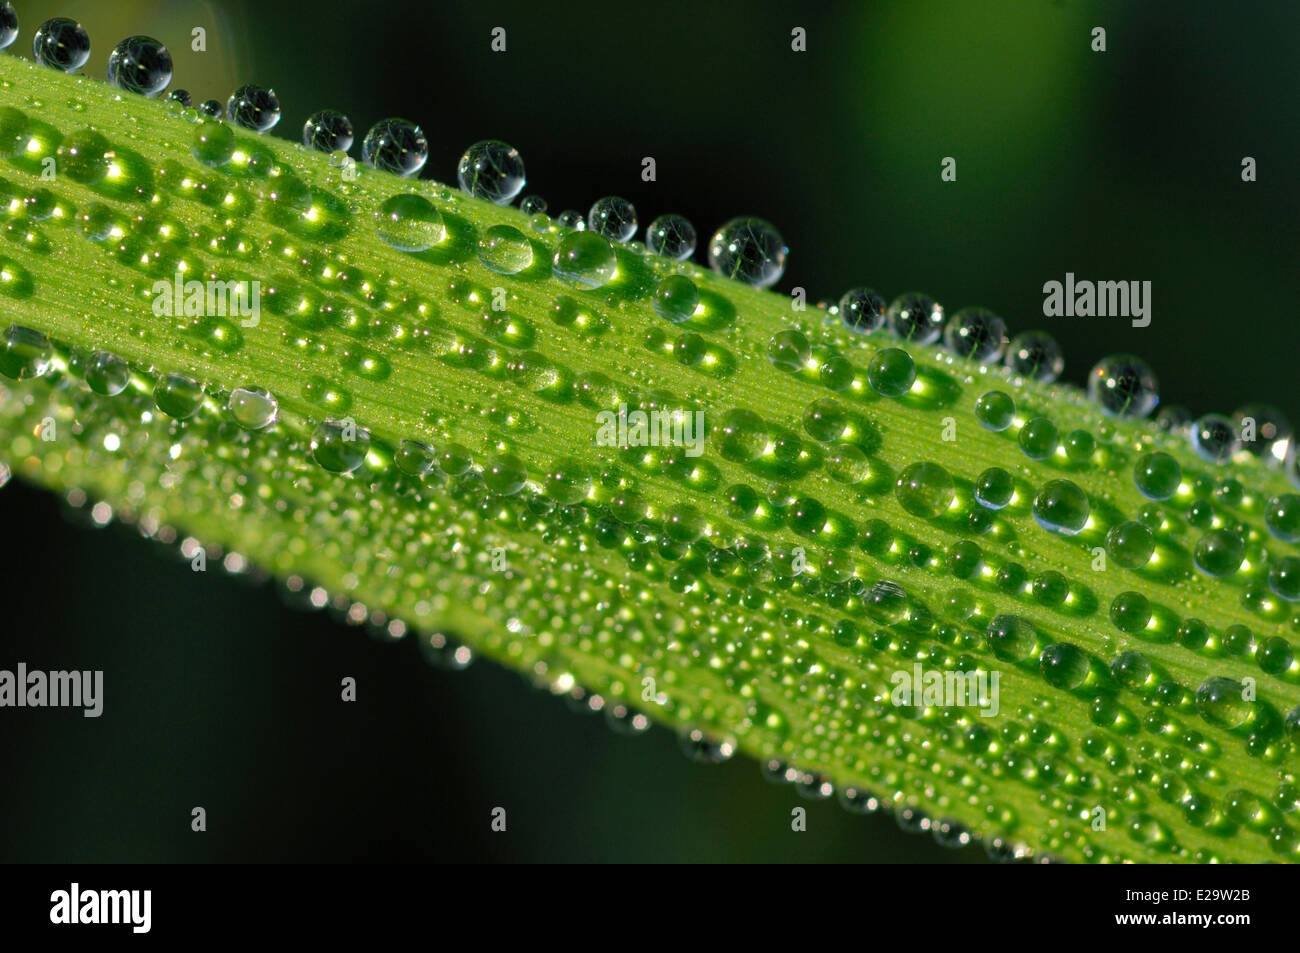 France, Ardennes, Carignan, drops of water aligned on a green sheet Stock Photo